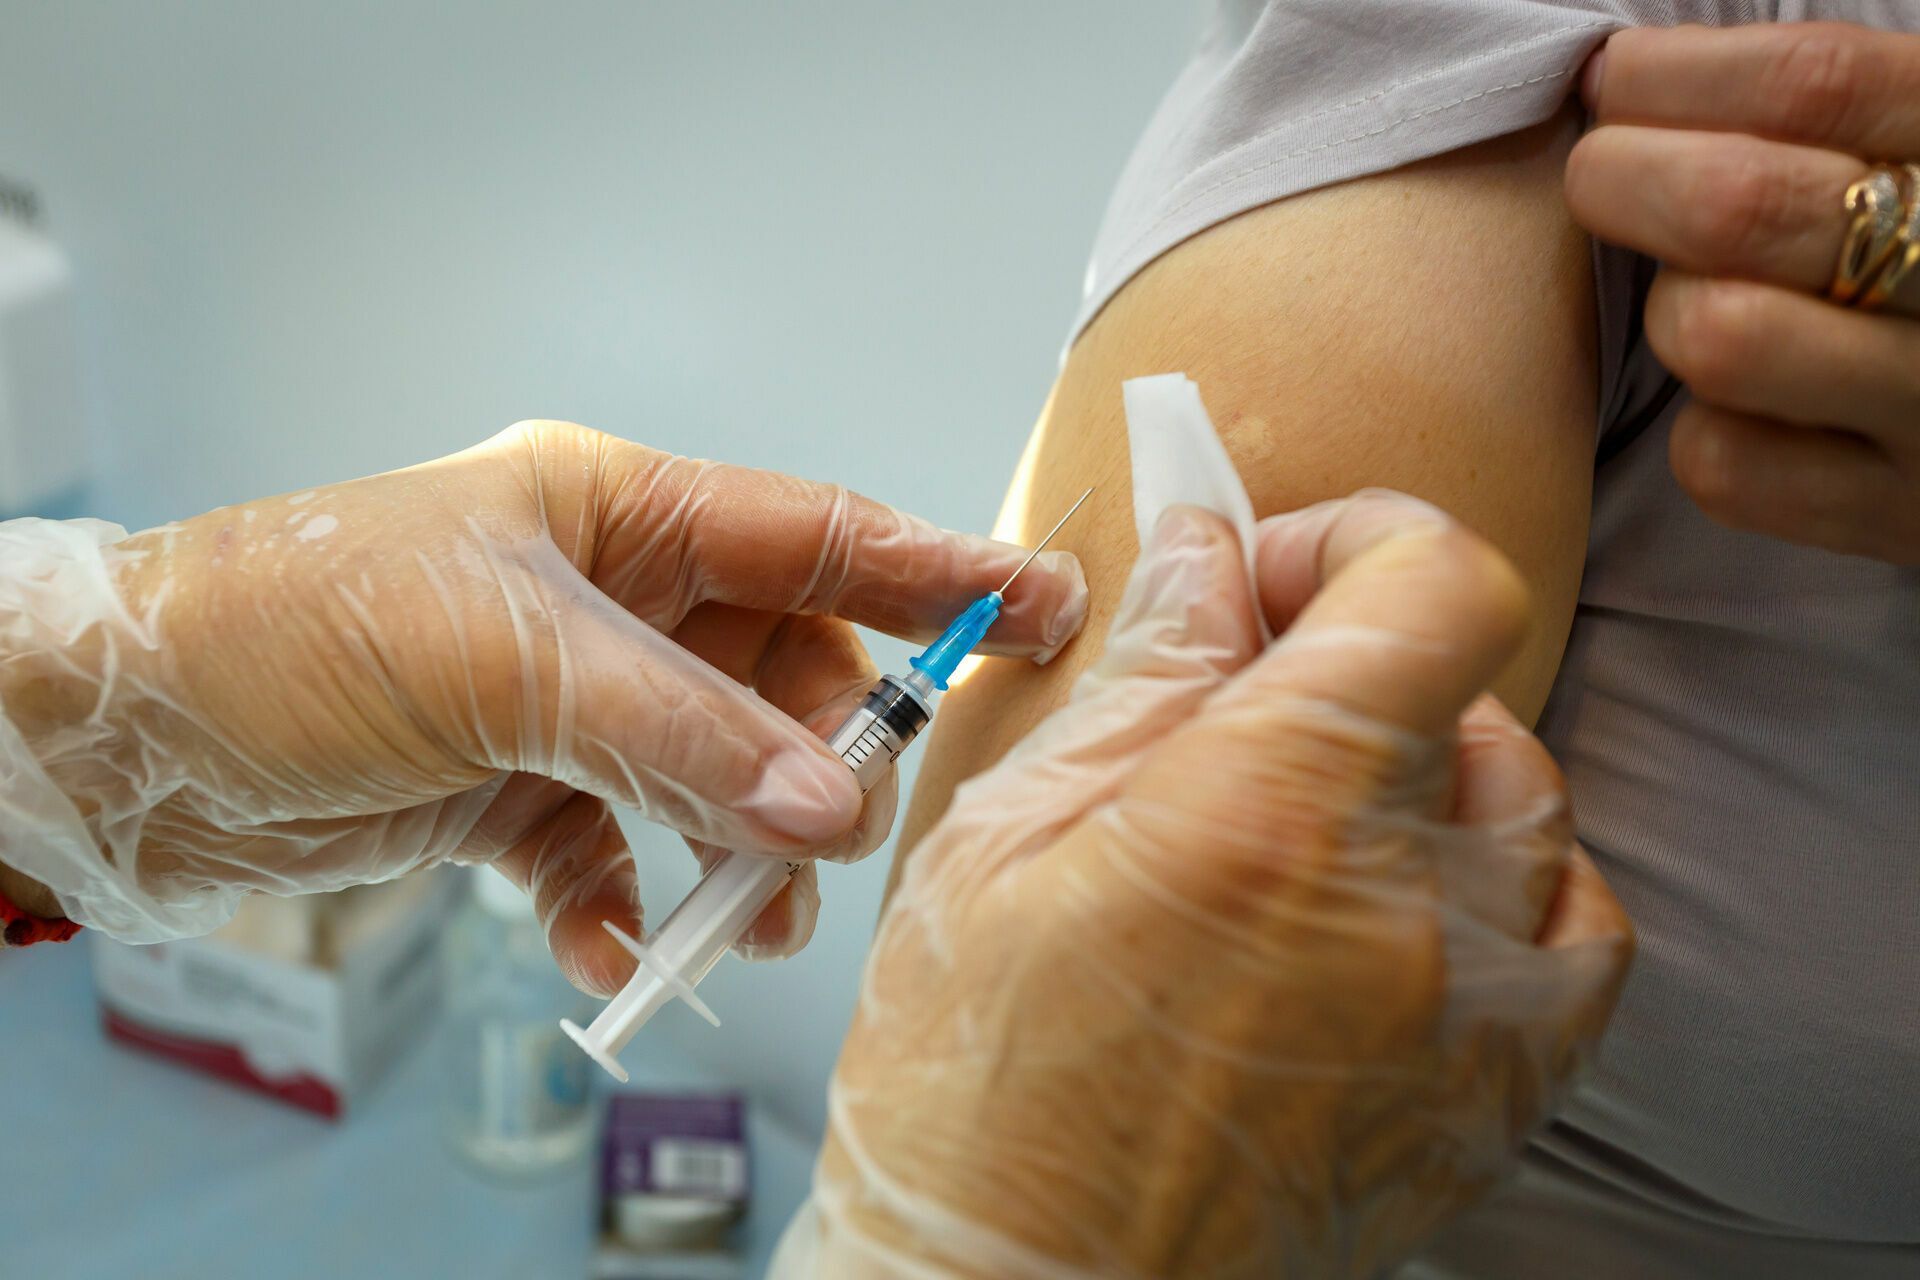 Roszdravnadzor has identified a thousand falsely vaccinated residents of the Moscow region on "Gosuslugi"